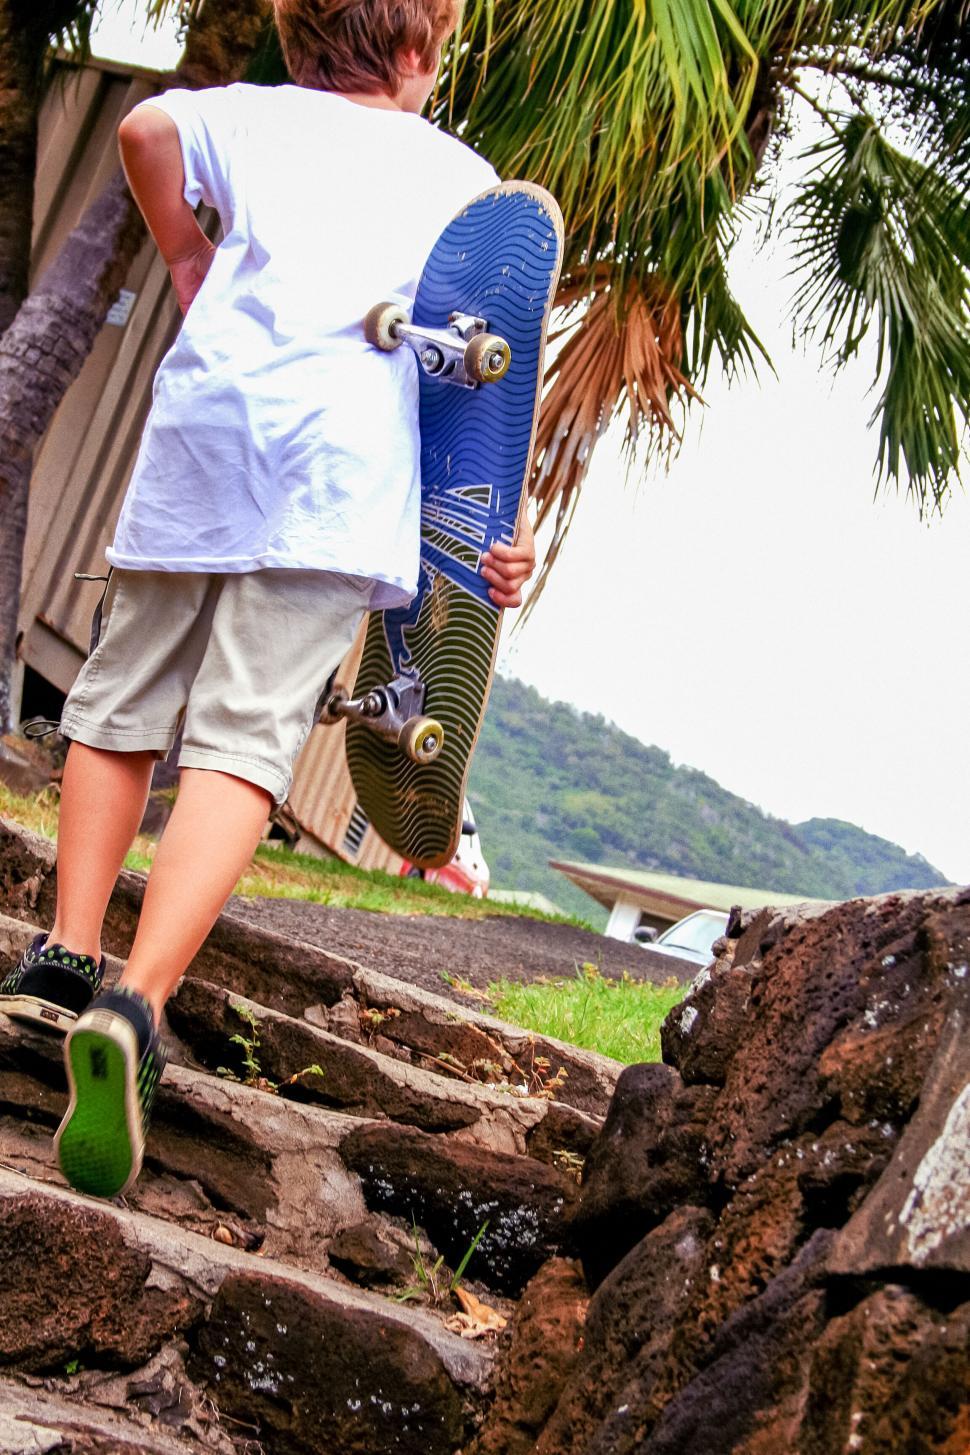 Free Image of Boy With Skateboard Climbing Up Rustic Steps 